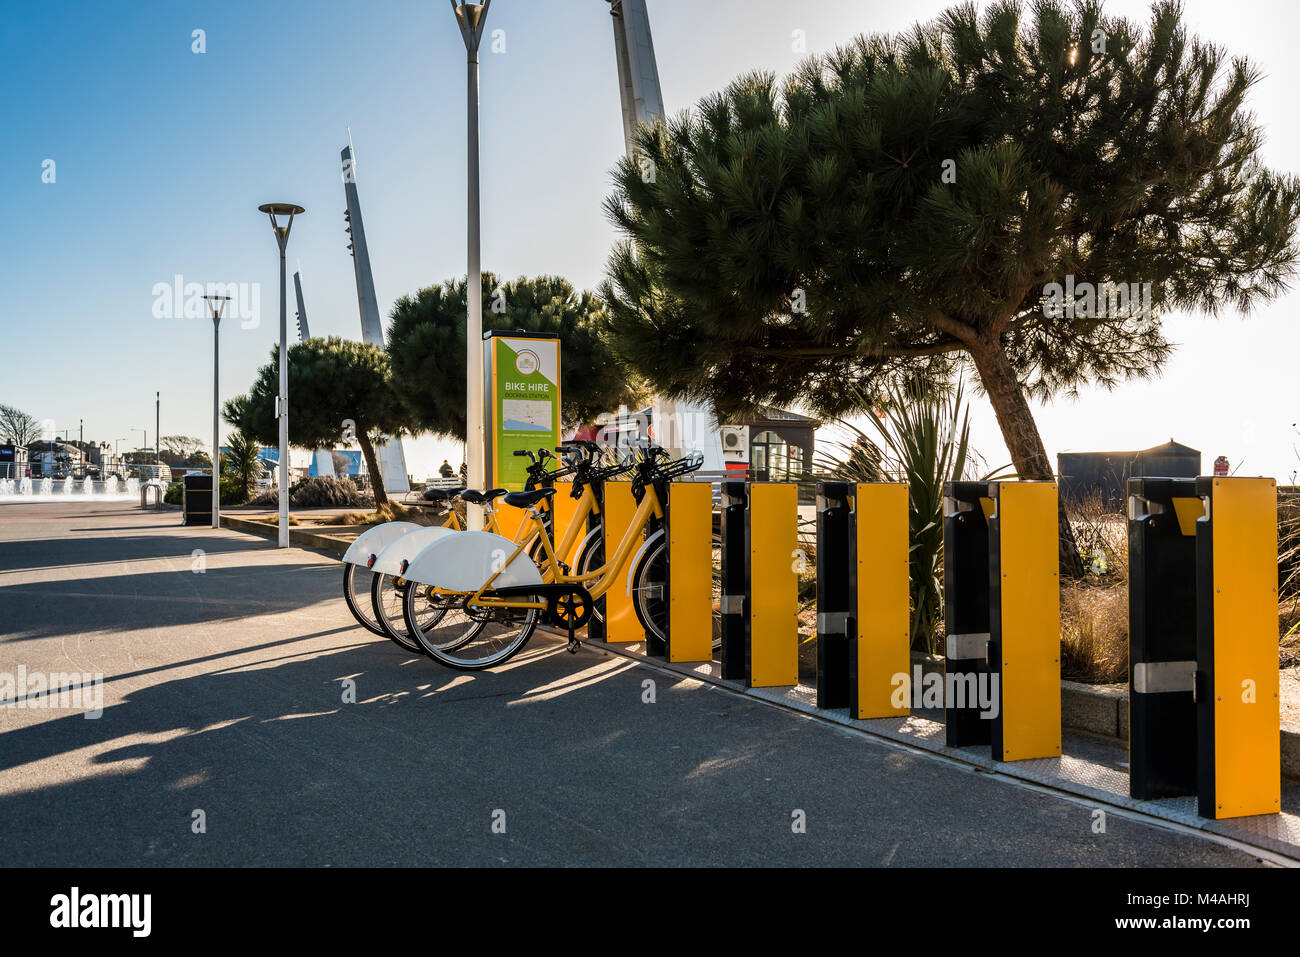 Motionhub cycle hire southend on sea seafront. Bicycle rental. Stock Photo